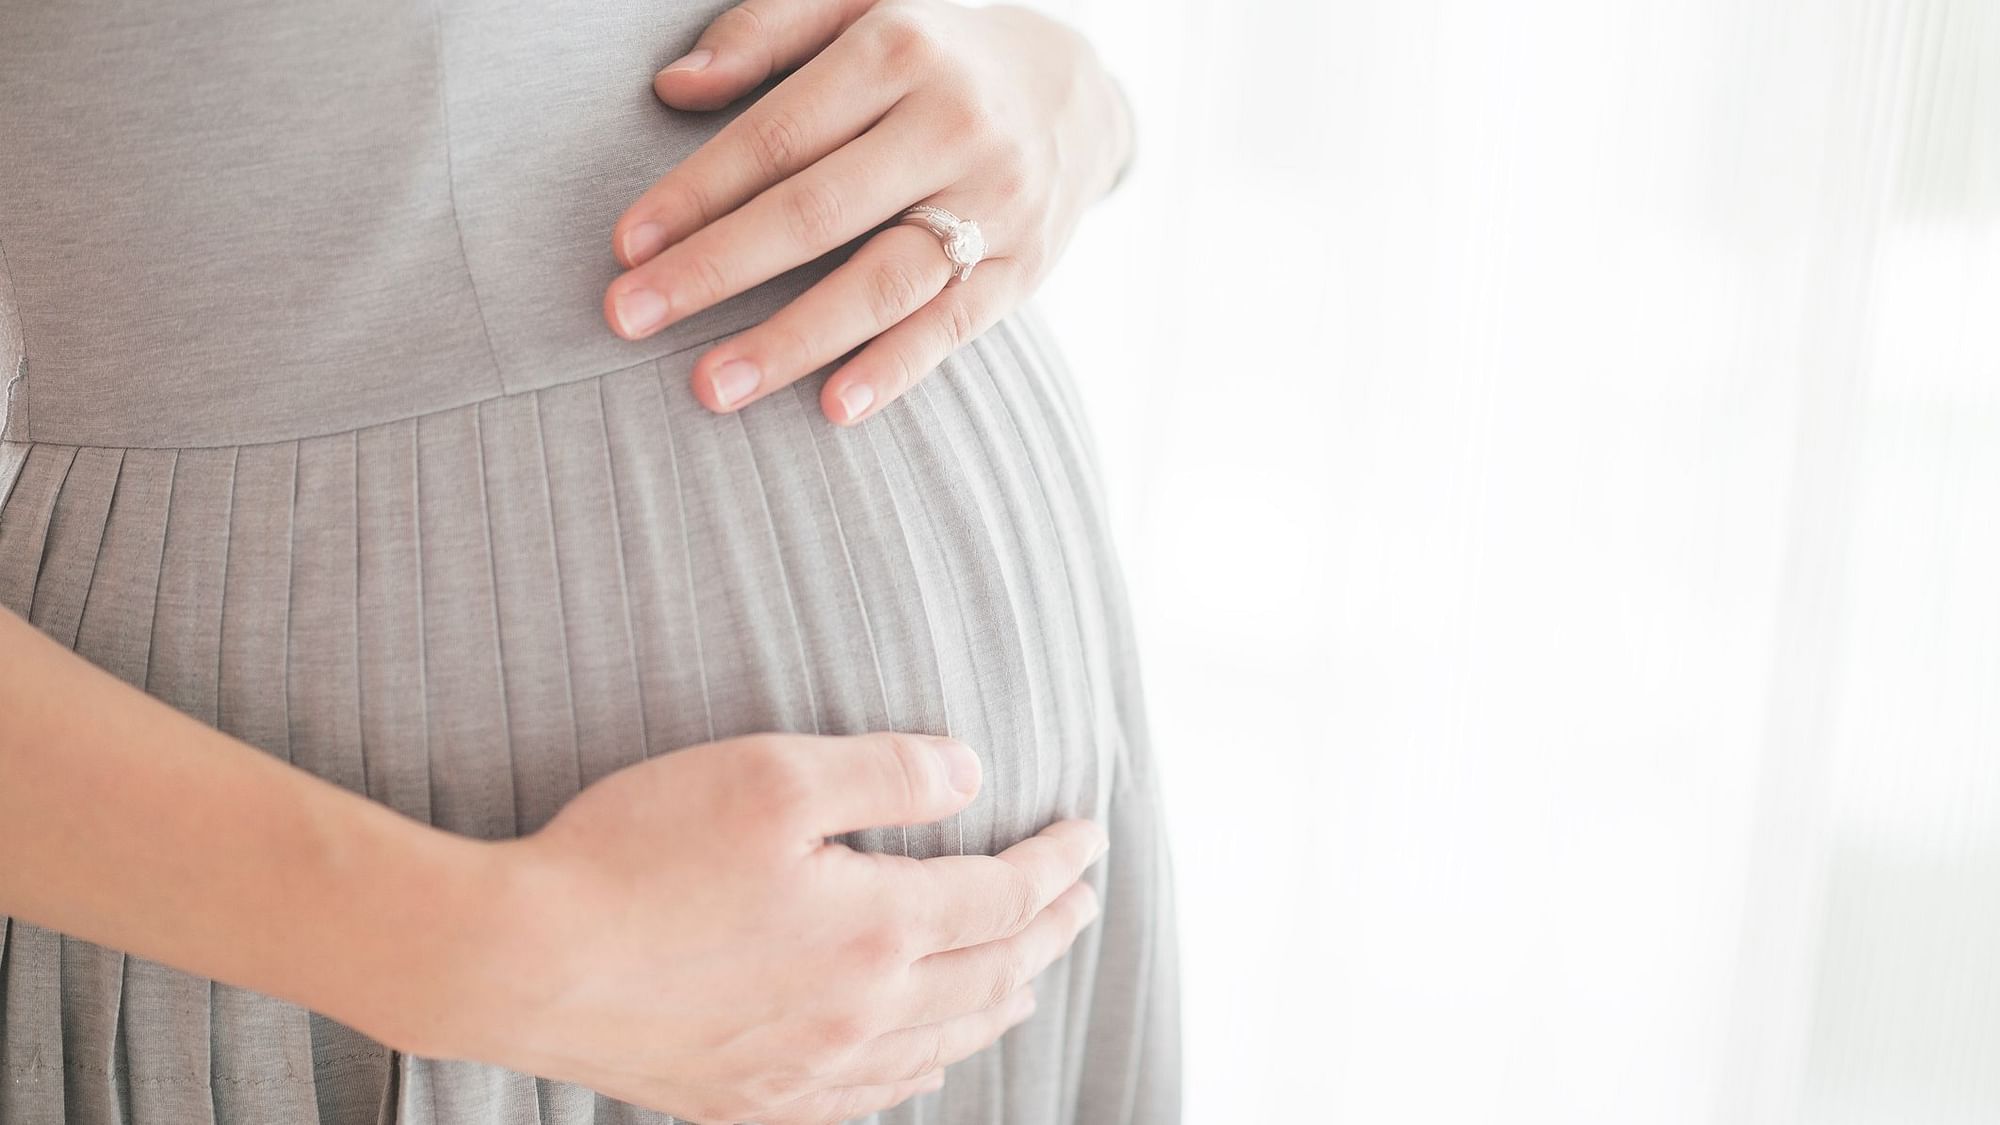 Exposure to certain chemicals during the first trimester of pregnancy could lead to lower IQ in the baby.